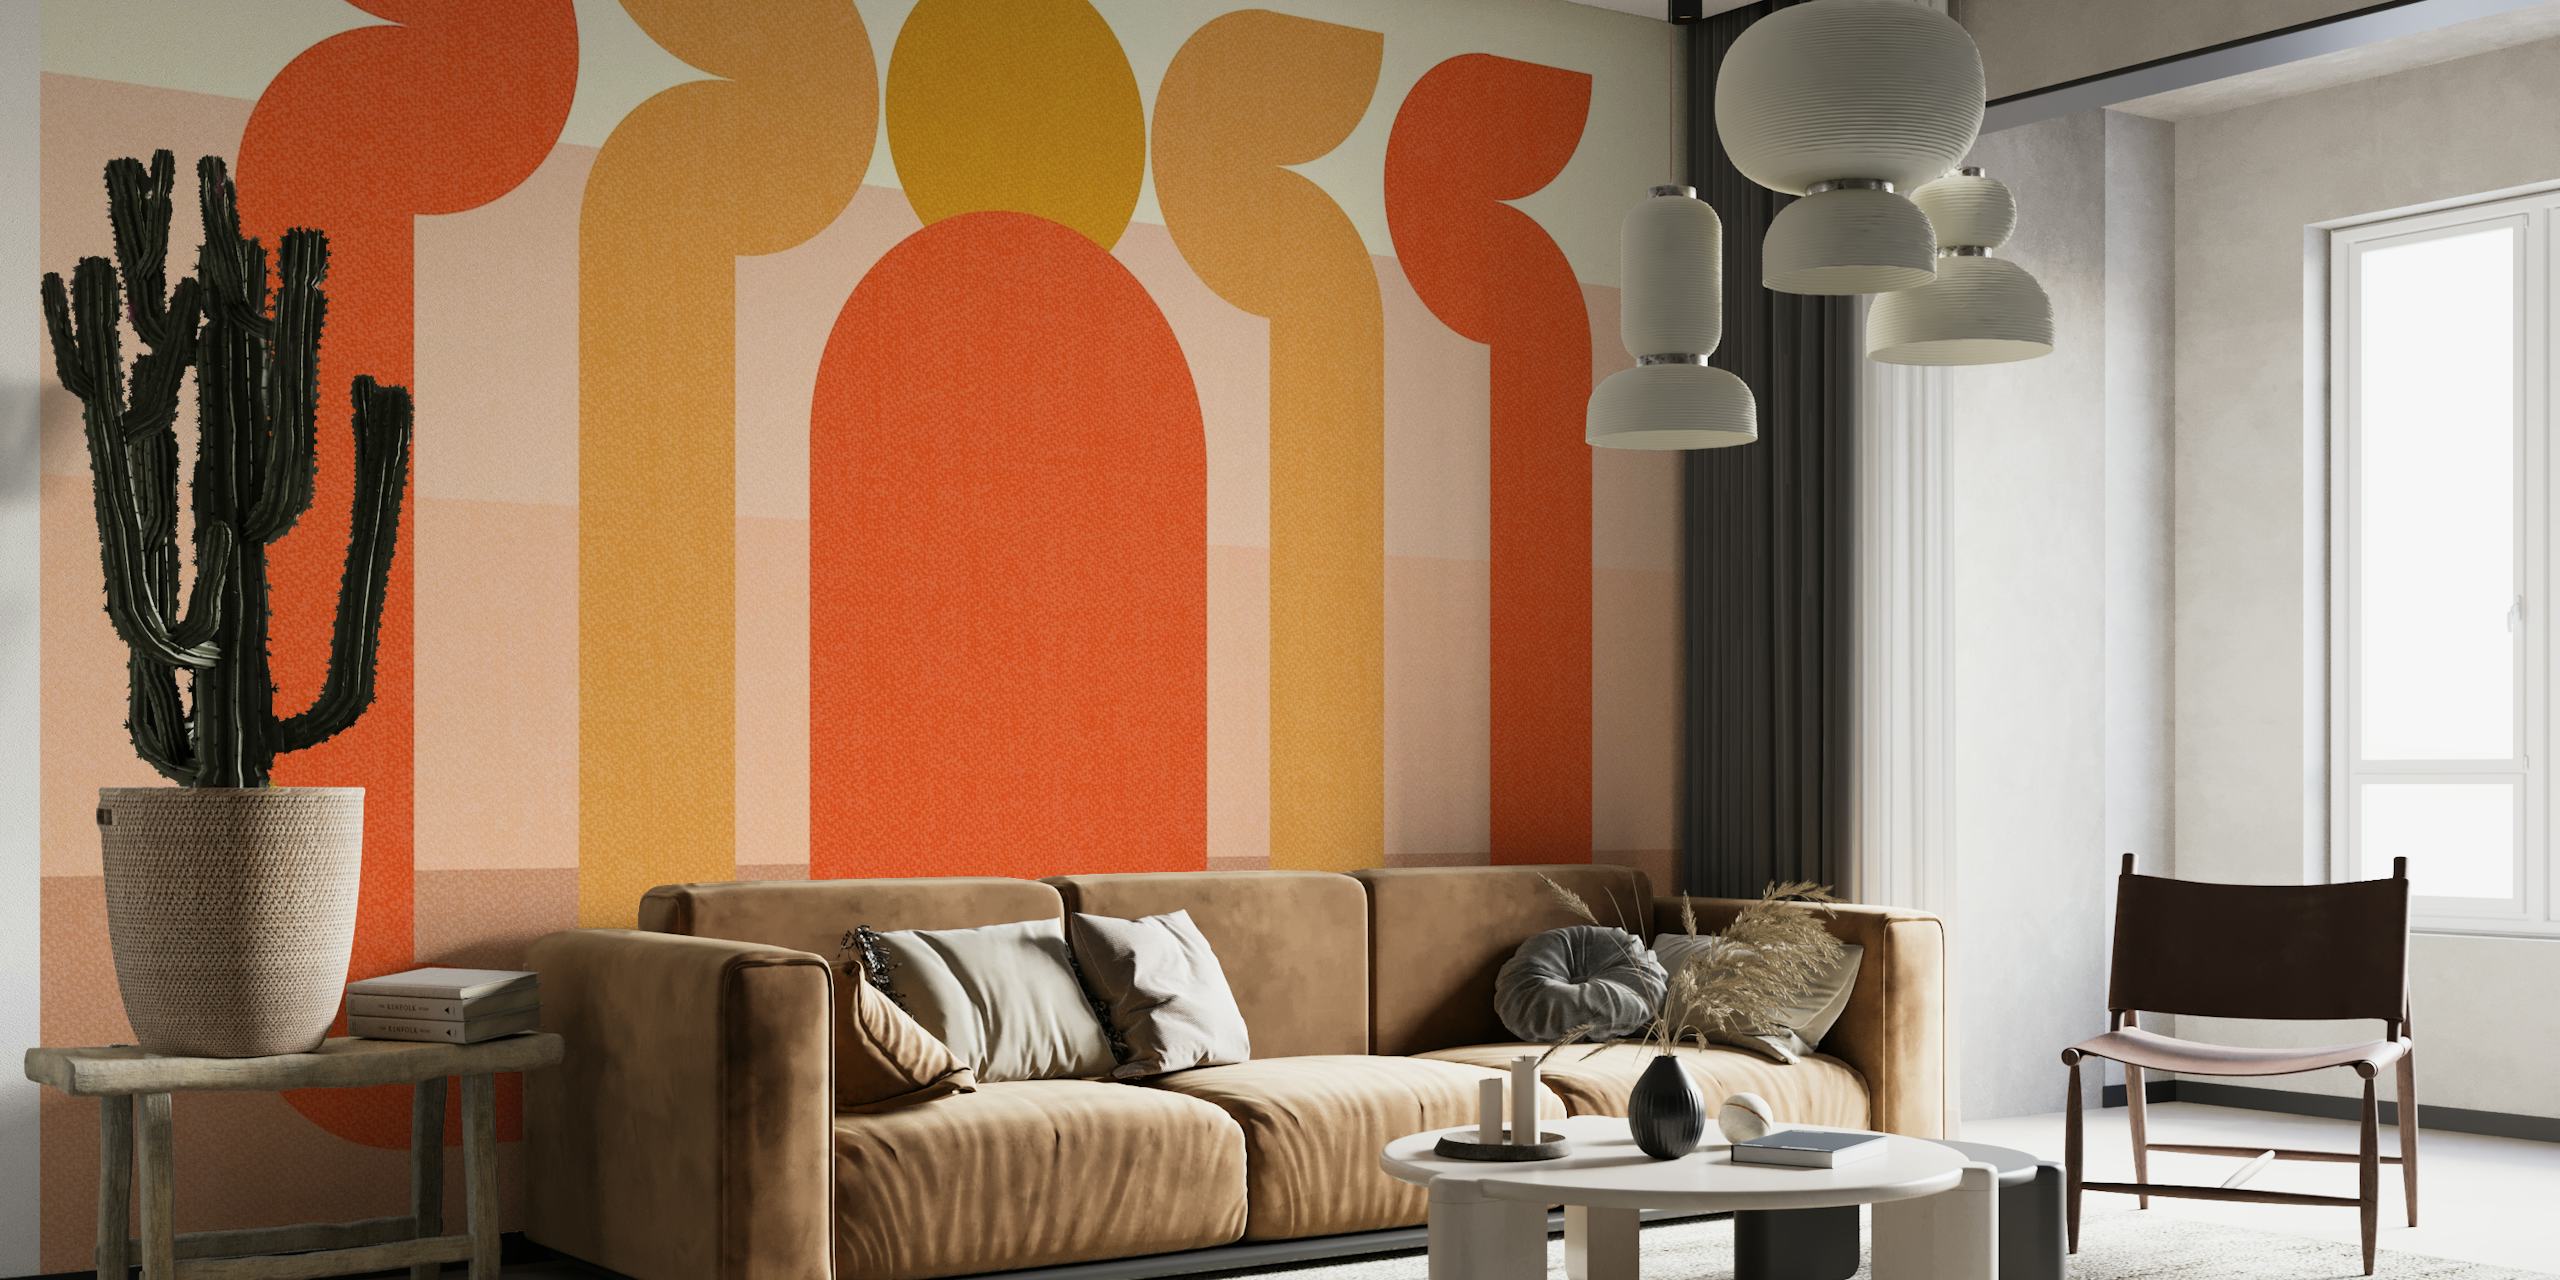 Retro Sun Minimalist wall mural with geometric shapes and pastel colors